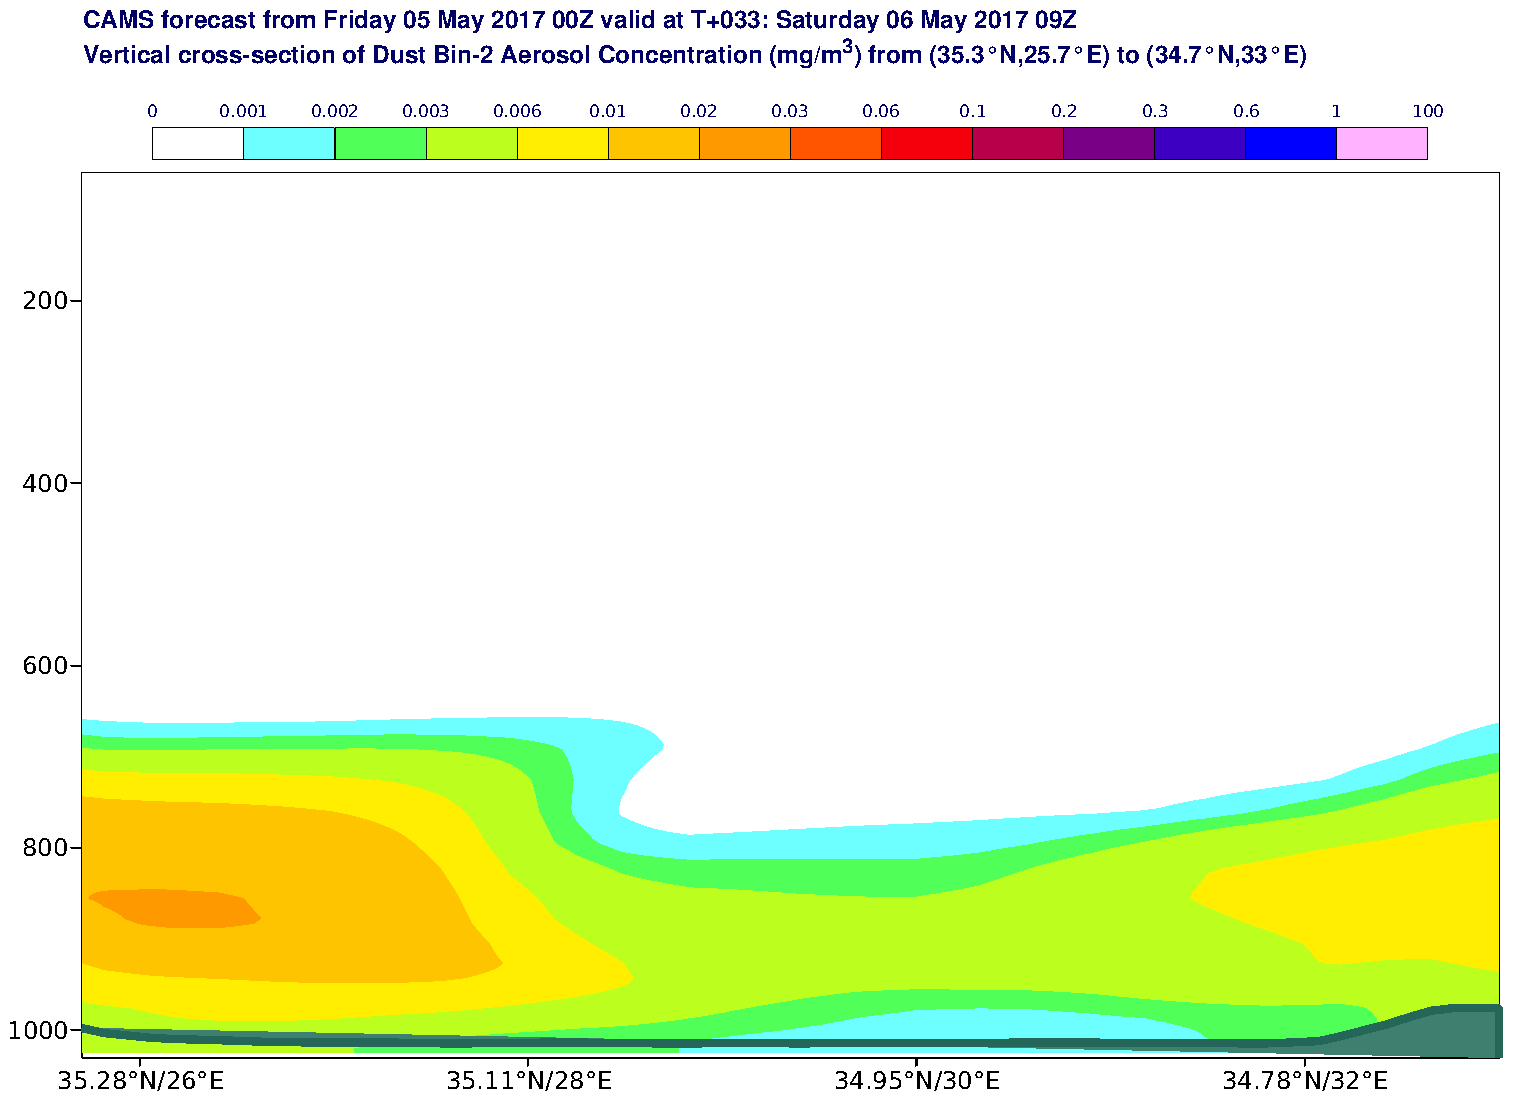 Vertical cross-section of Dust Bin-2 Aerosol Concentration (mg/m3) valid at T33 - 2017-05-06 09:00